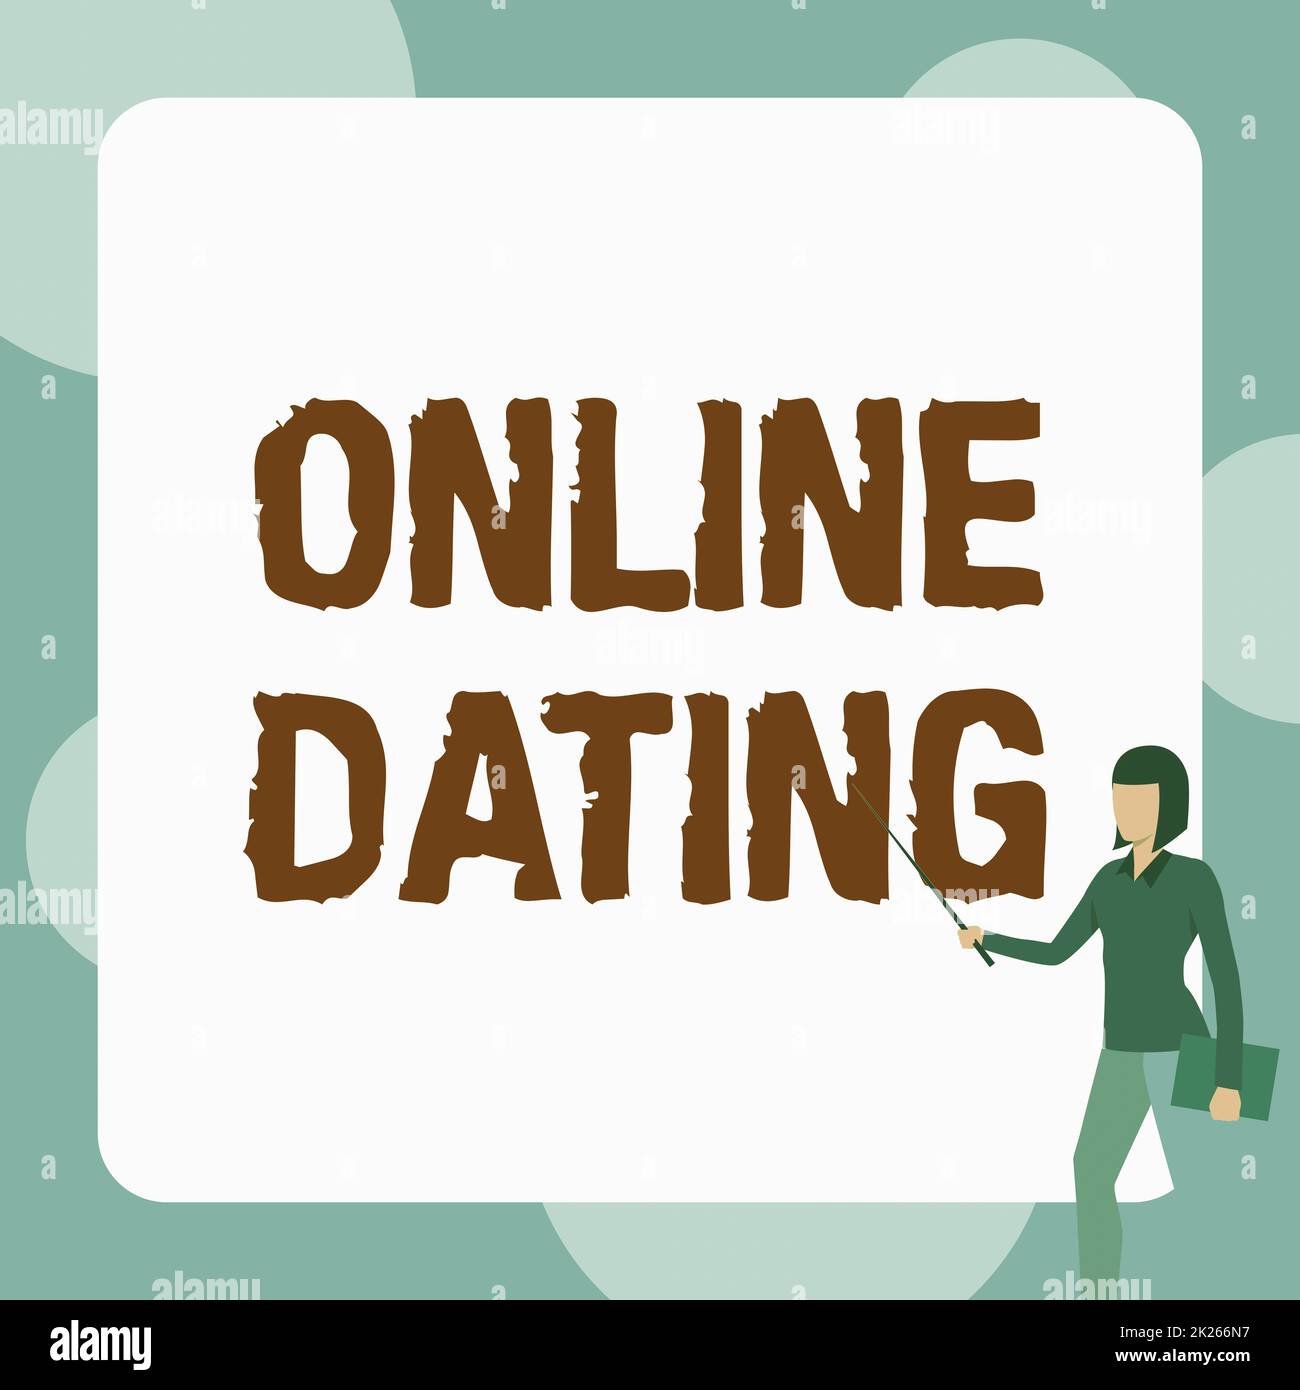 Inspiration showing sign Online Dating. Business concept Searching Matching Relationships eDating Video Chatting Lady Standing Holding Notebook While Pointing Stick In Blank Whiteboard. Stock Photo